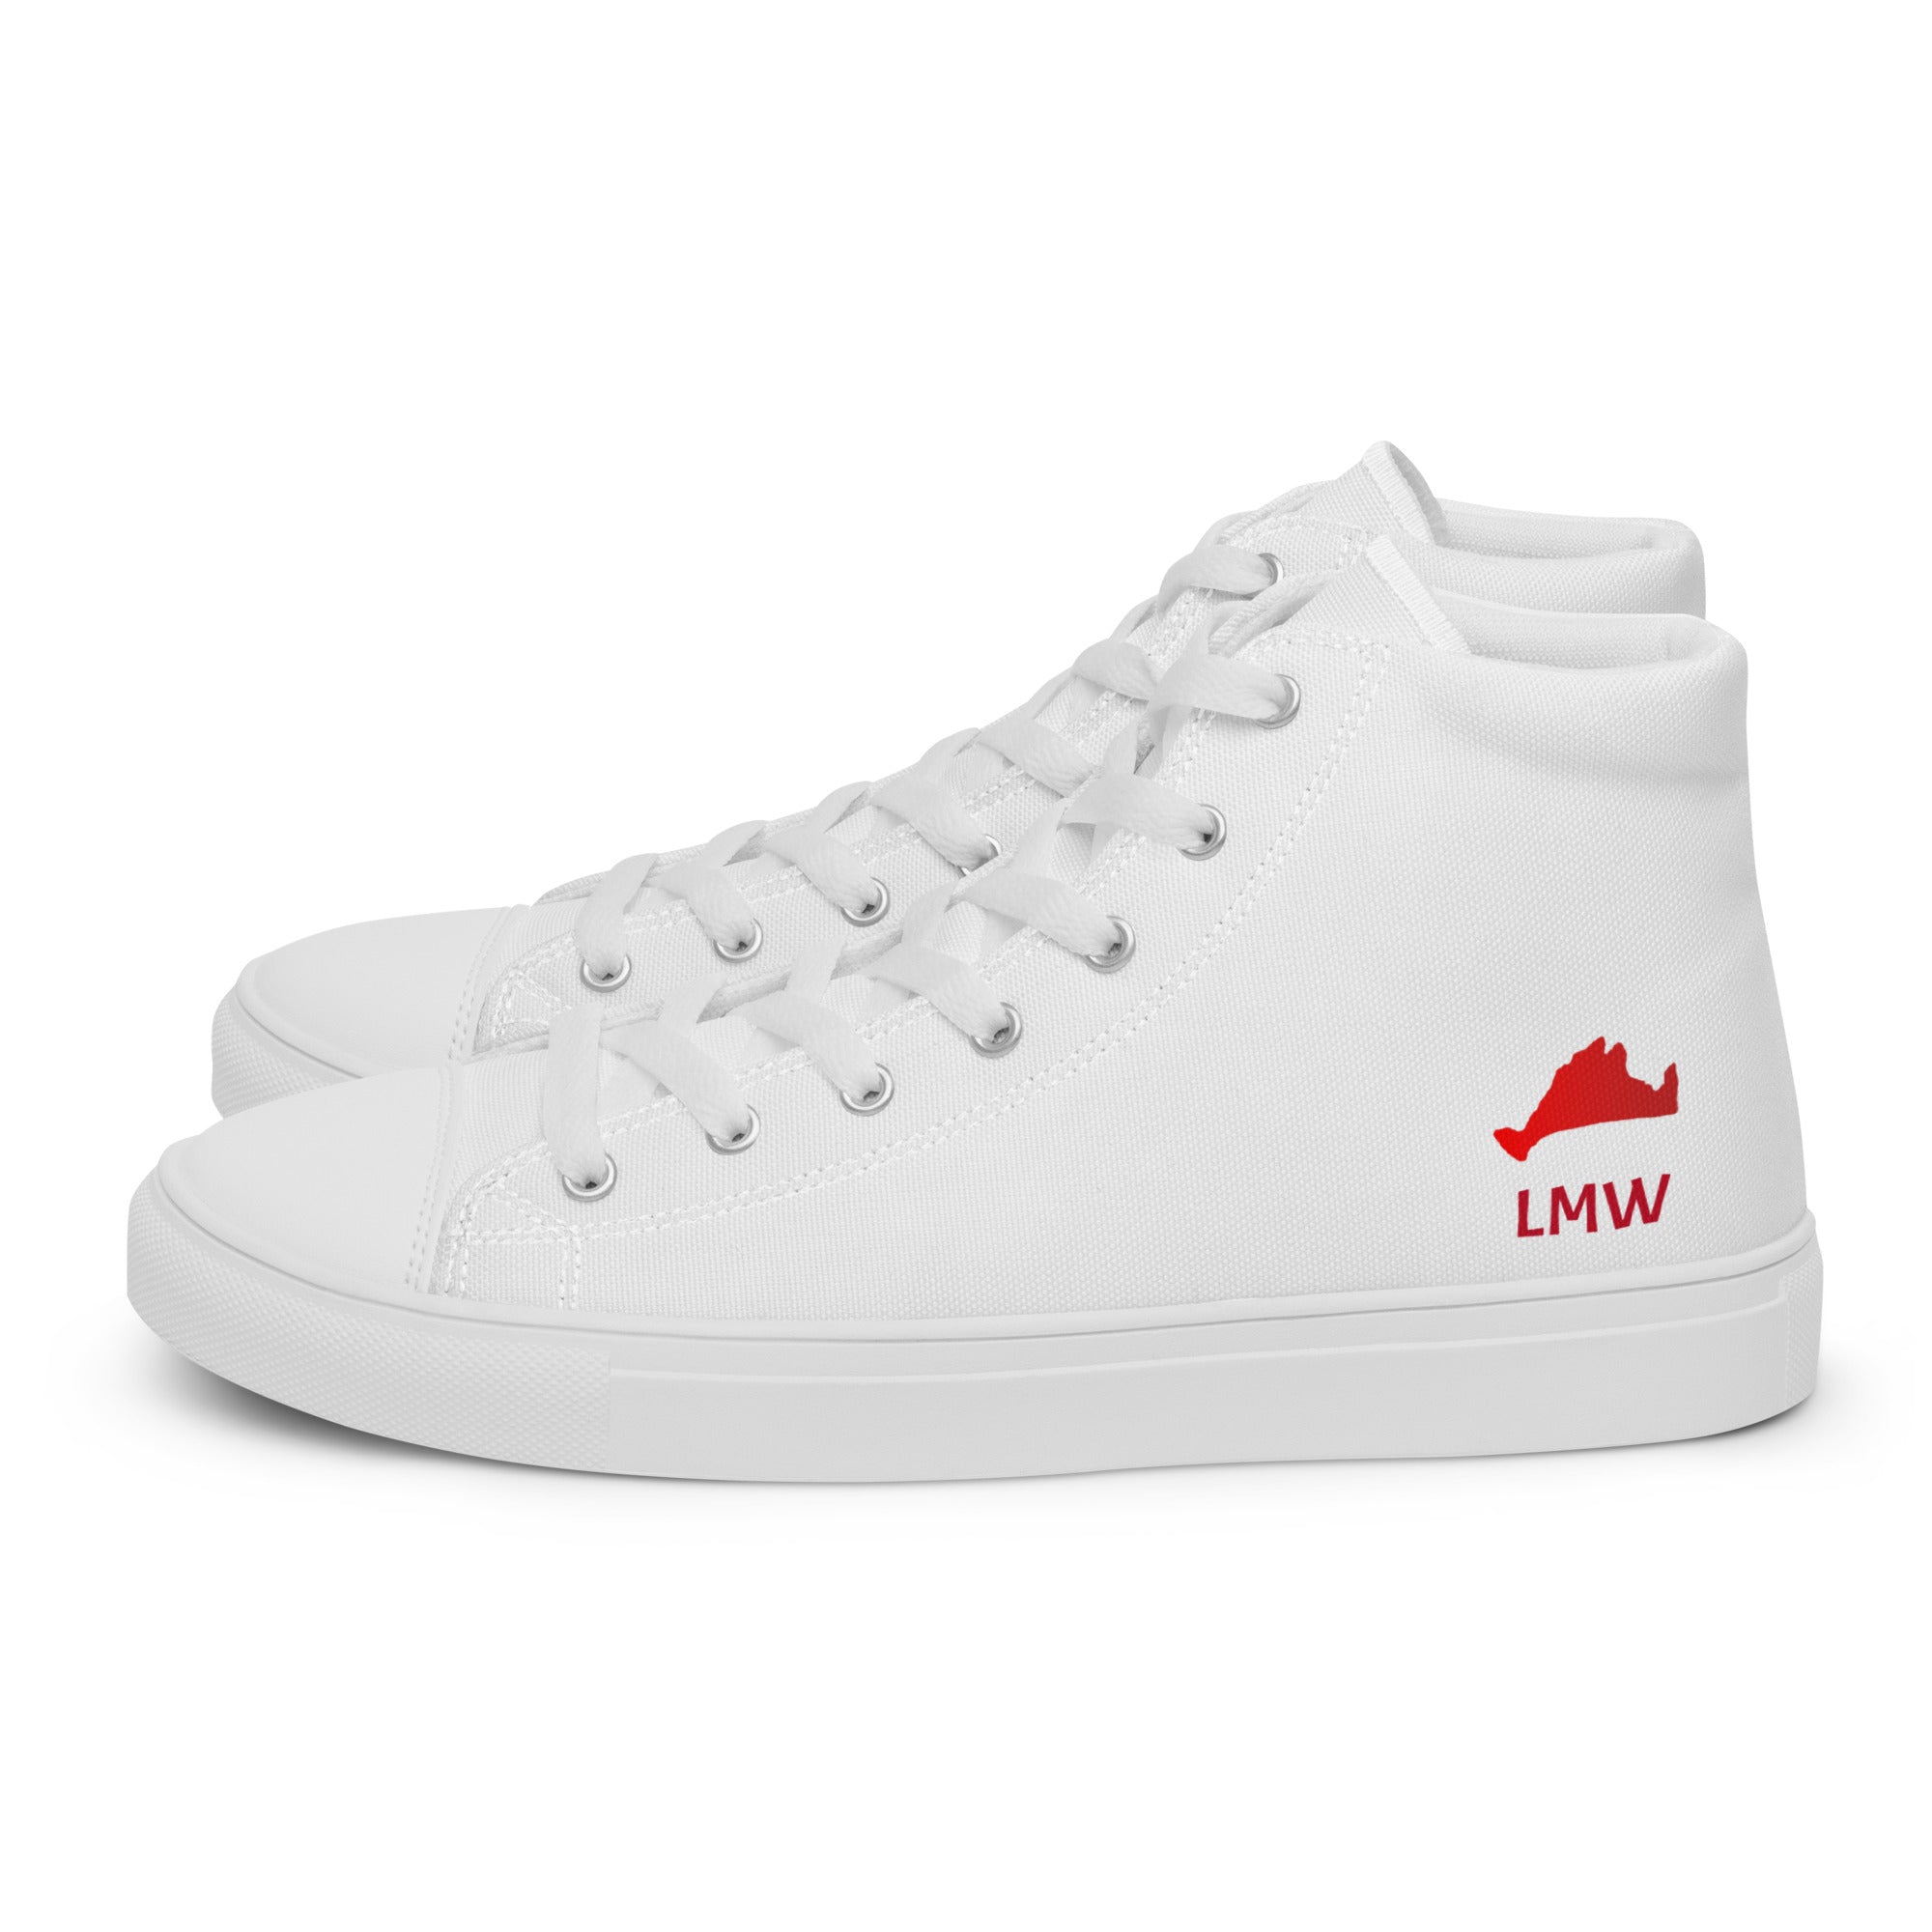 Red LMW Women’s high top canvas shoes